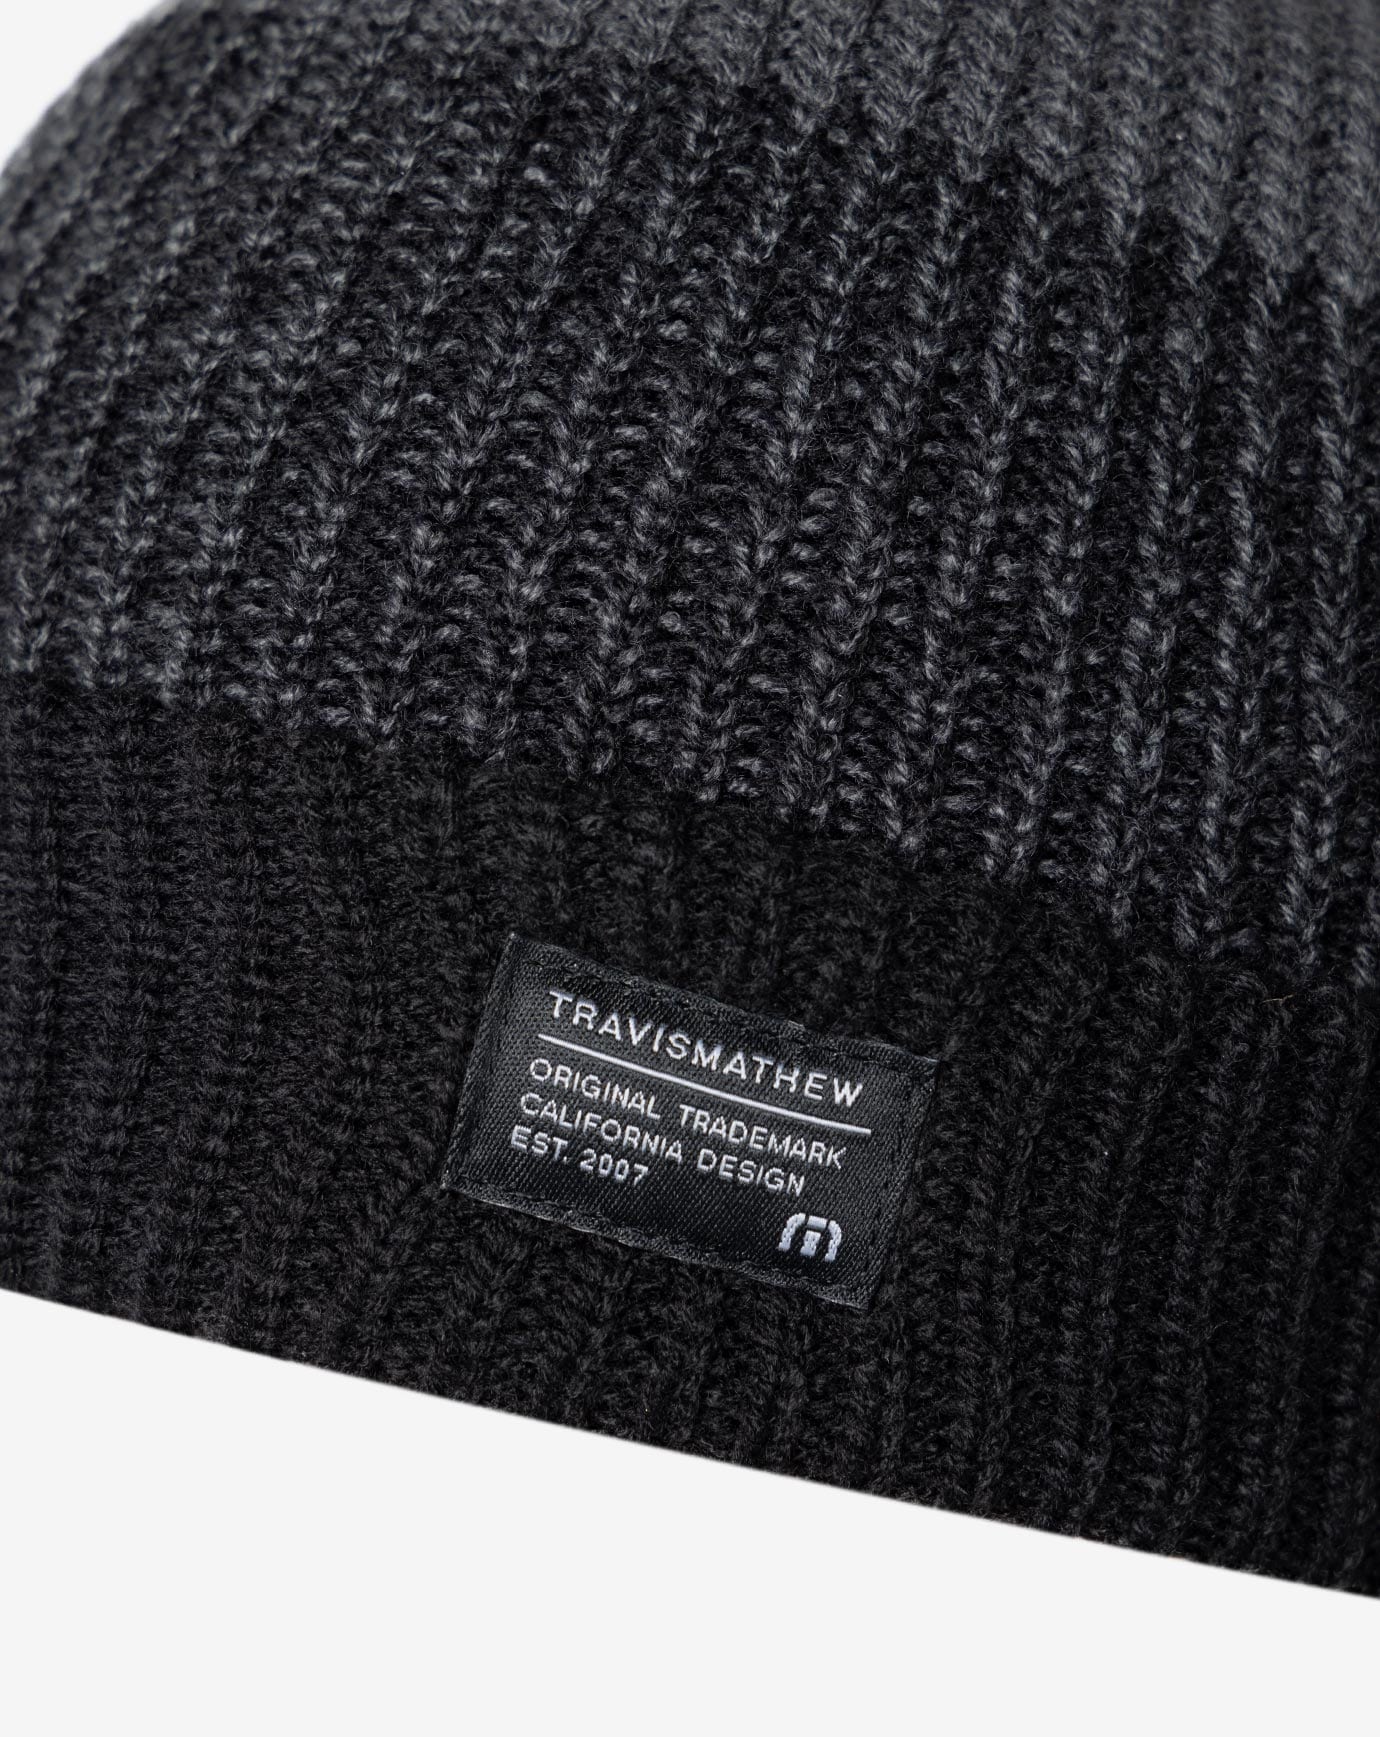 PREVAILING WINDS BEANIE Image Thumbnail 4